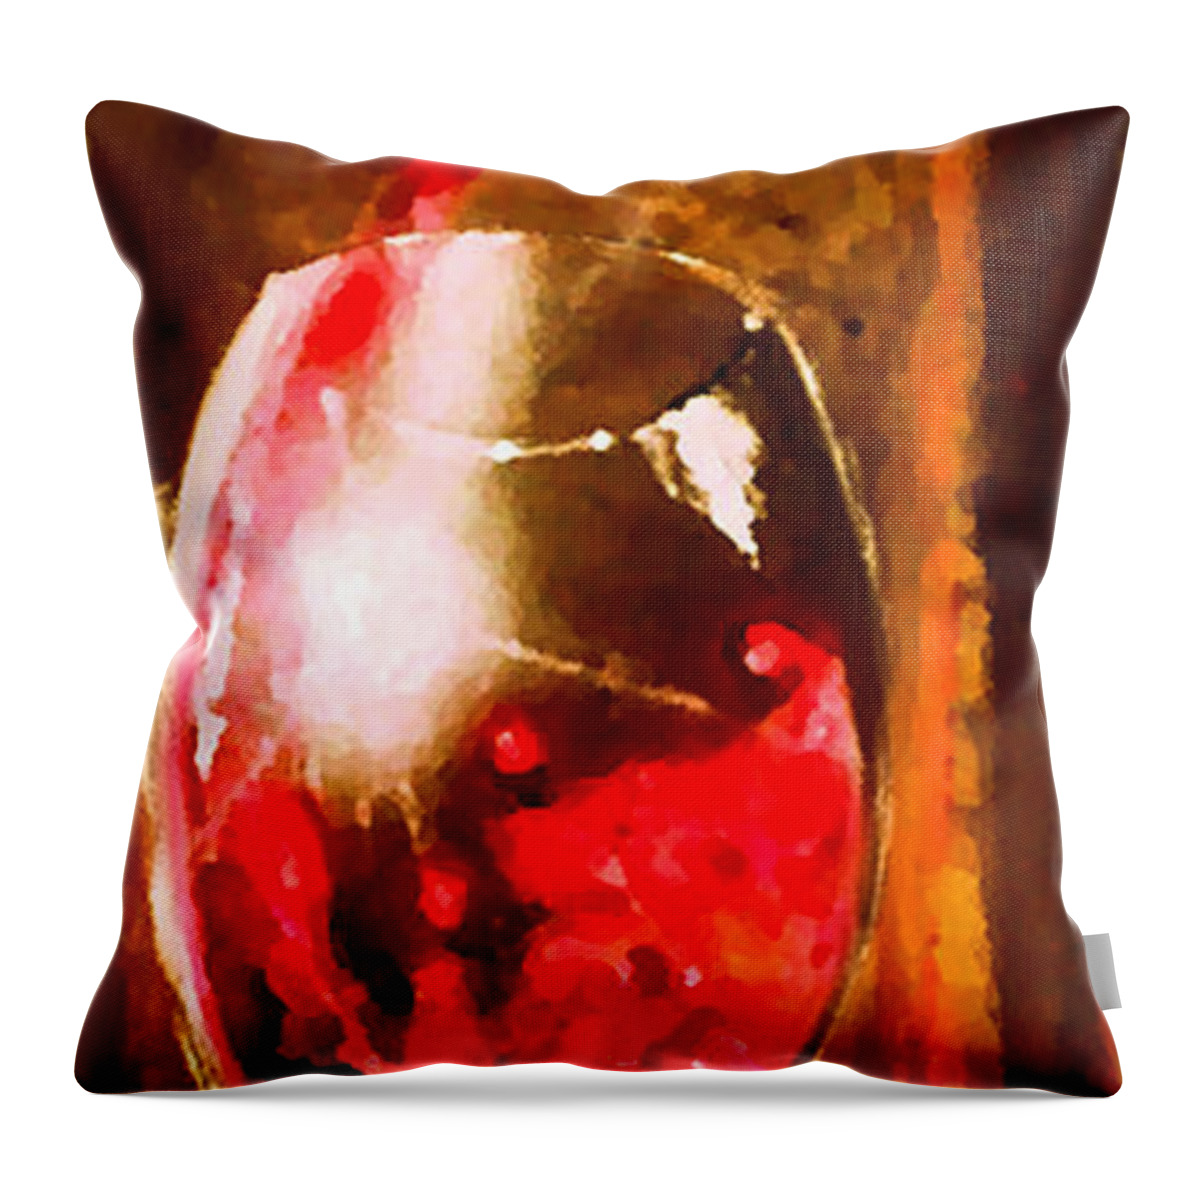 Vino Throw Pillow featuring the painting Cristallo 2 by Marcello Cicchini